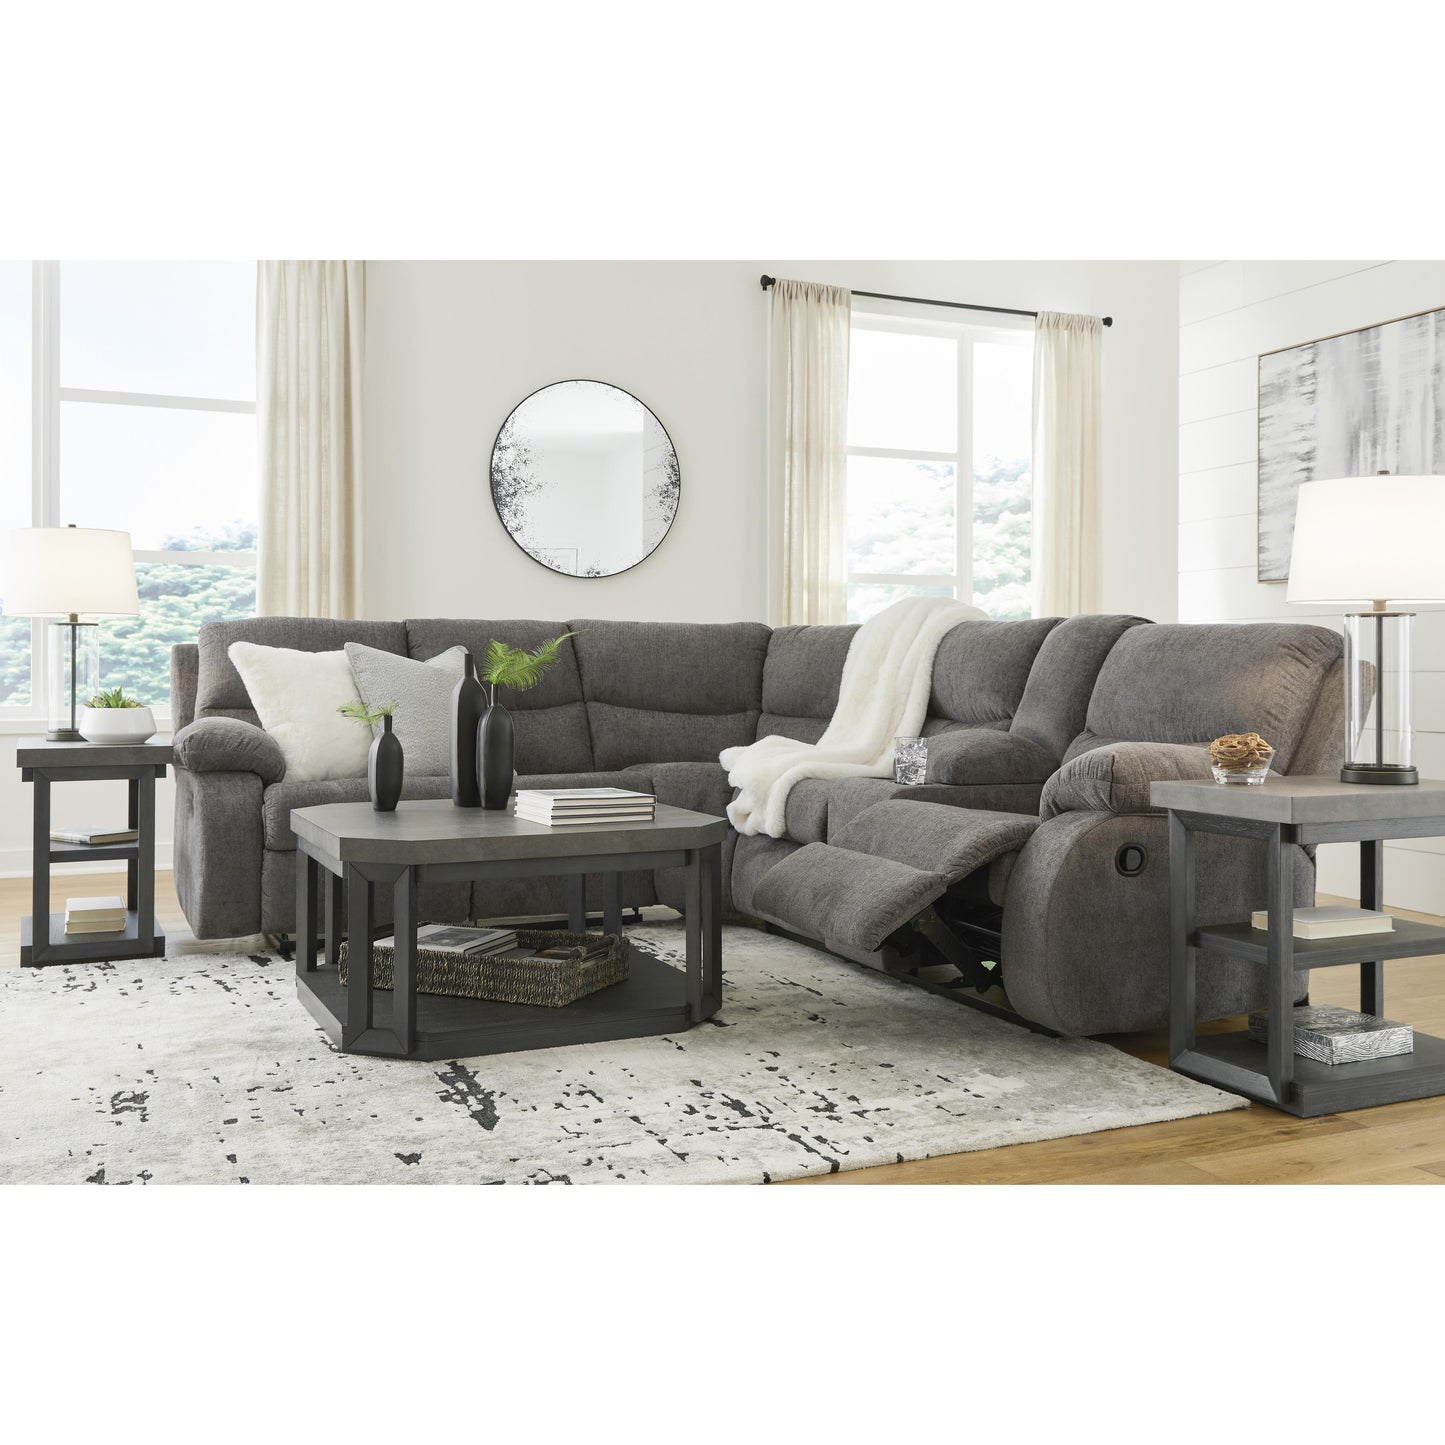 Signature Design by Ashley Museum 2 pc Sectional 8180748/8180749 IMAGE 4